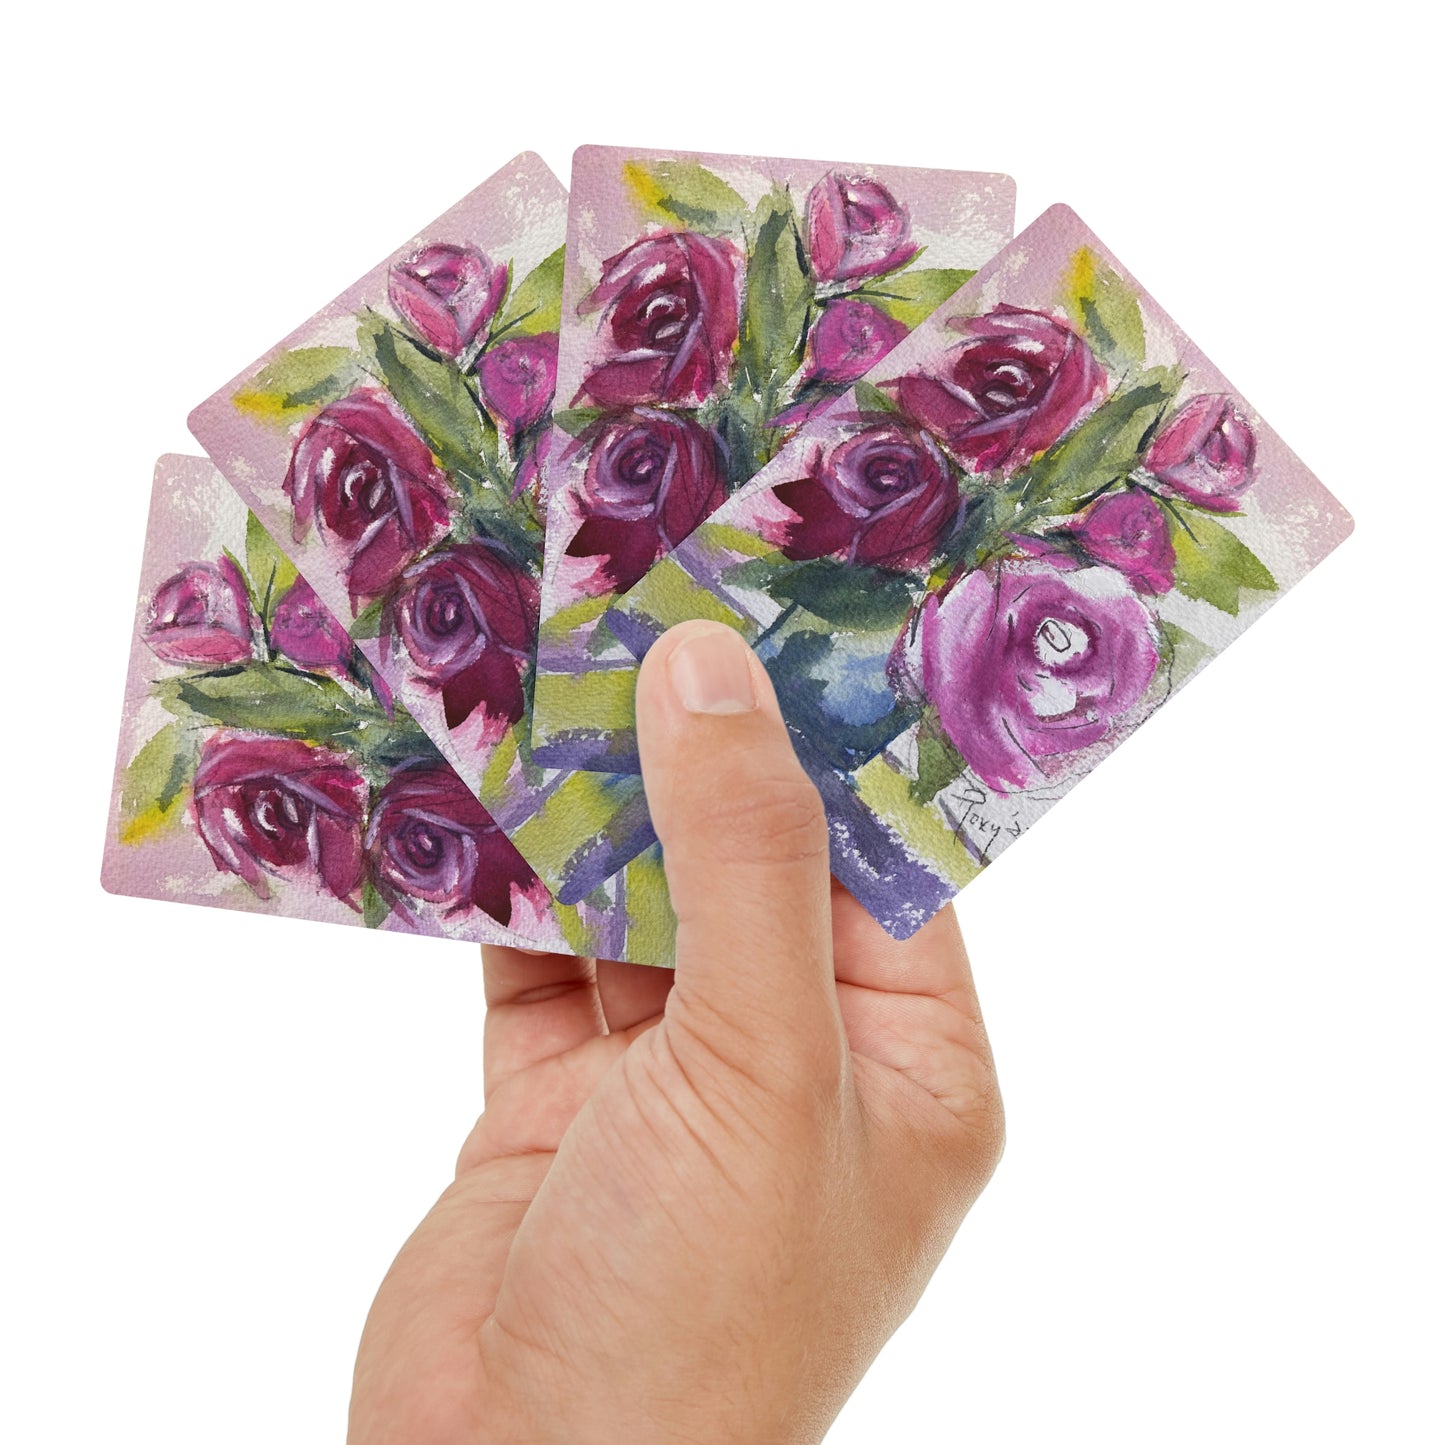 Roses in Surrey Poker Cards/Playing Cards